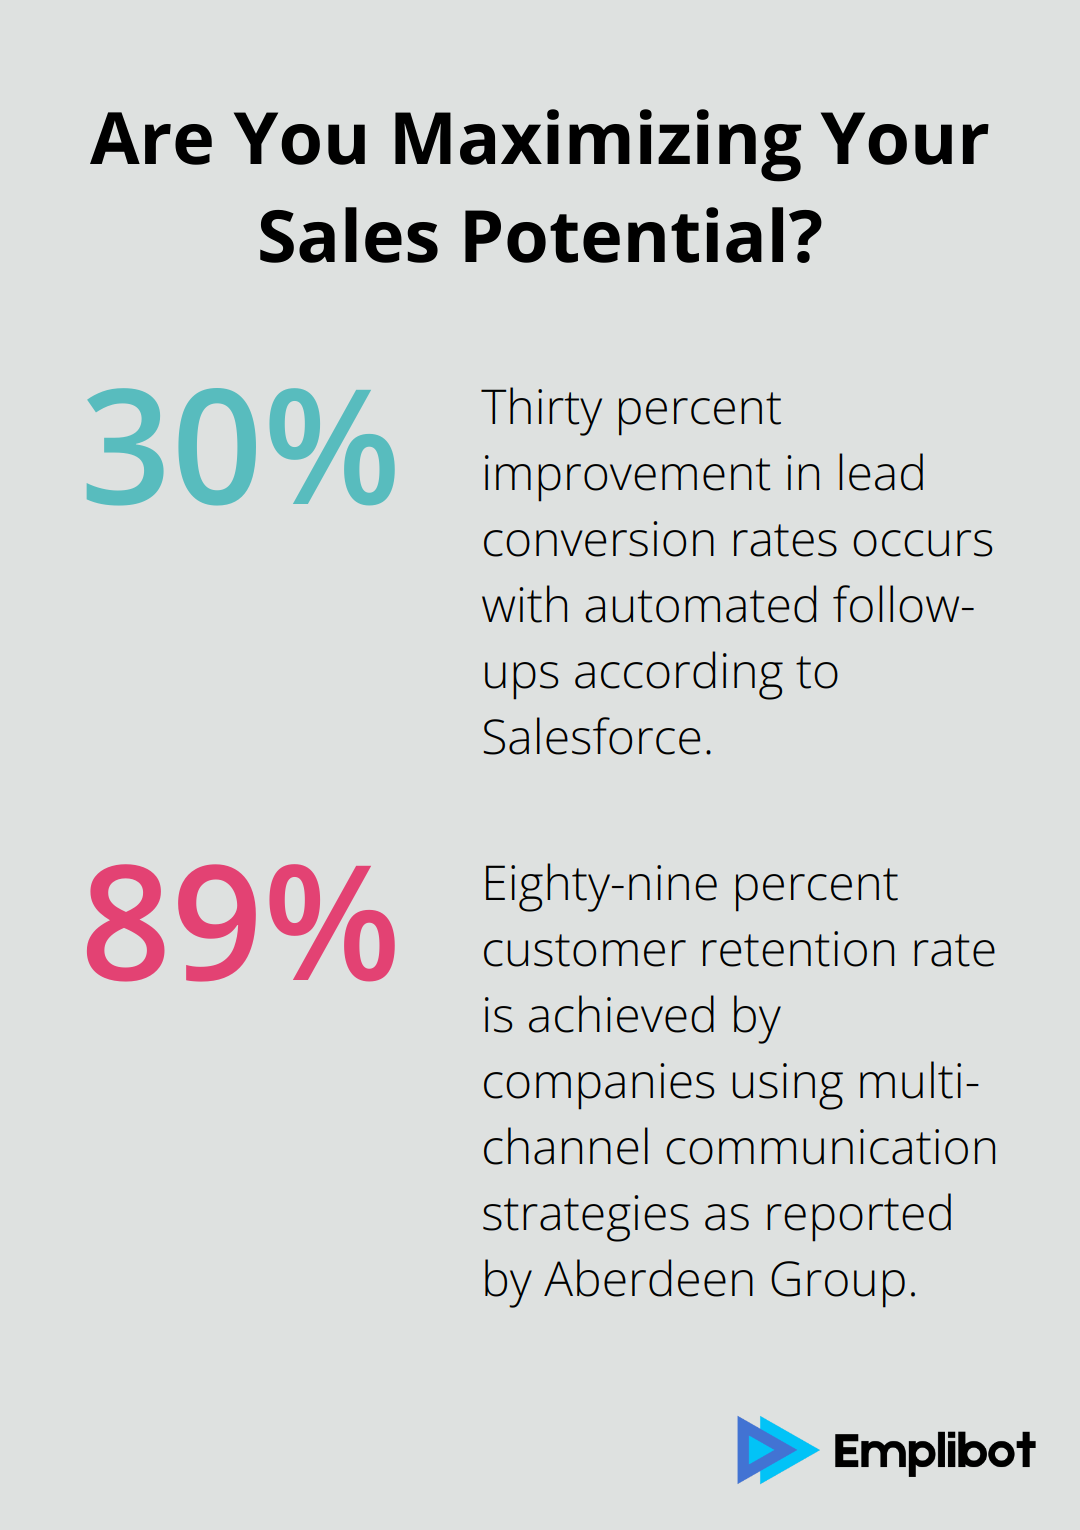 Fact - Are You Maximizing Your Sales Potential?